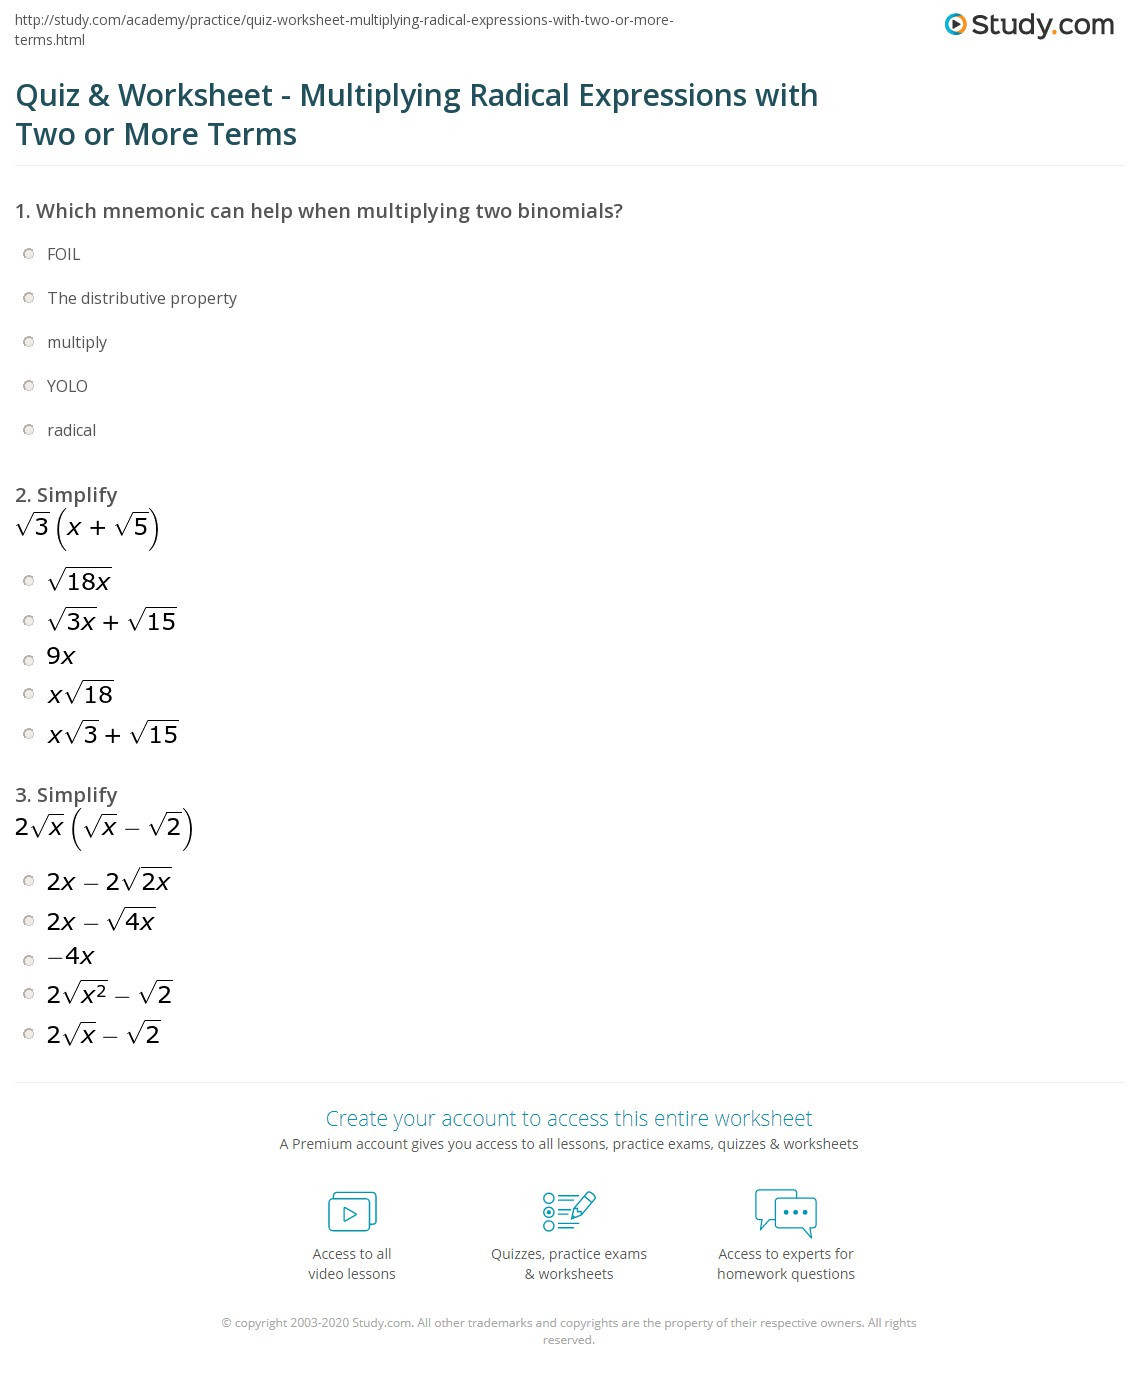 Adding and Subtracting Radicals Worksheet Quiz &amp; Worksheet Multiplying Radical Expressions with Two